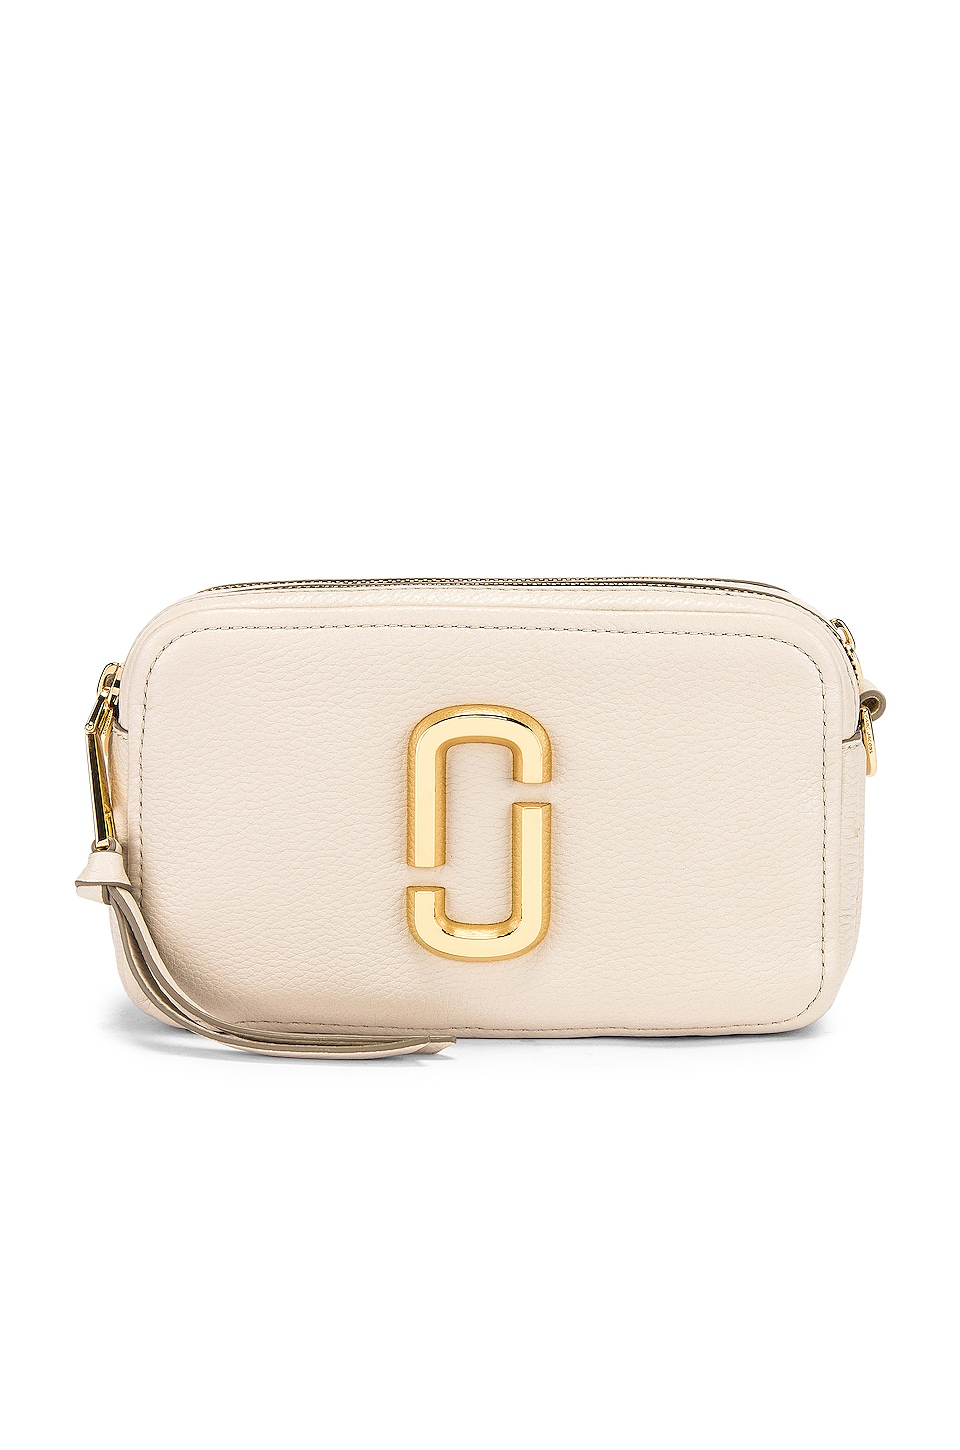 Marc Jacobs The Softshot 21 in Cream | REVOLVE